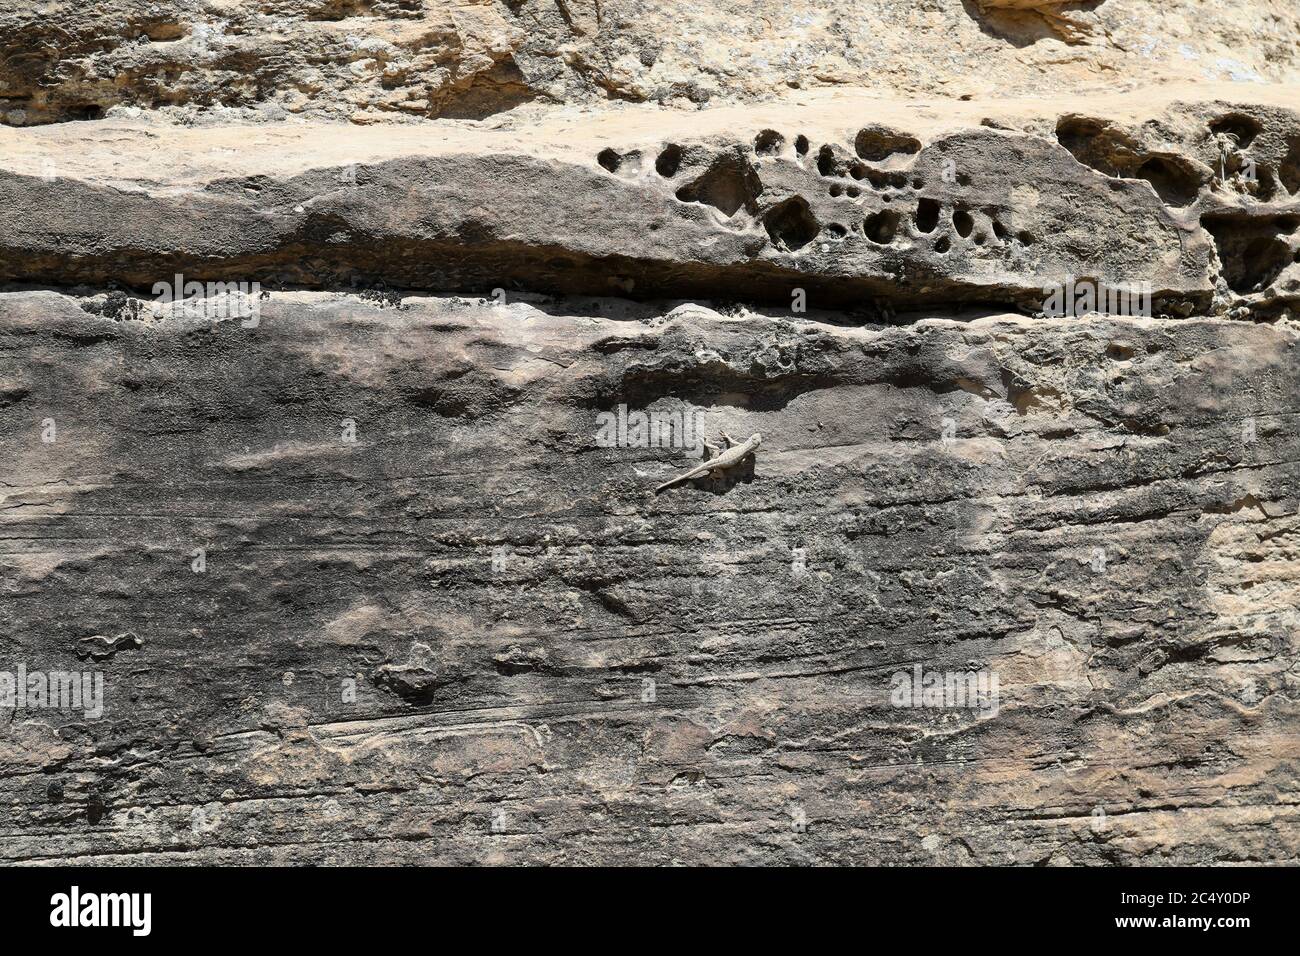 Lizard on rocky ledge. Dry hot desert landscape. Camouflaged against rough outdoor mountain rock. Stock Photo